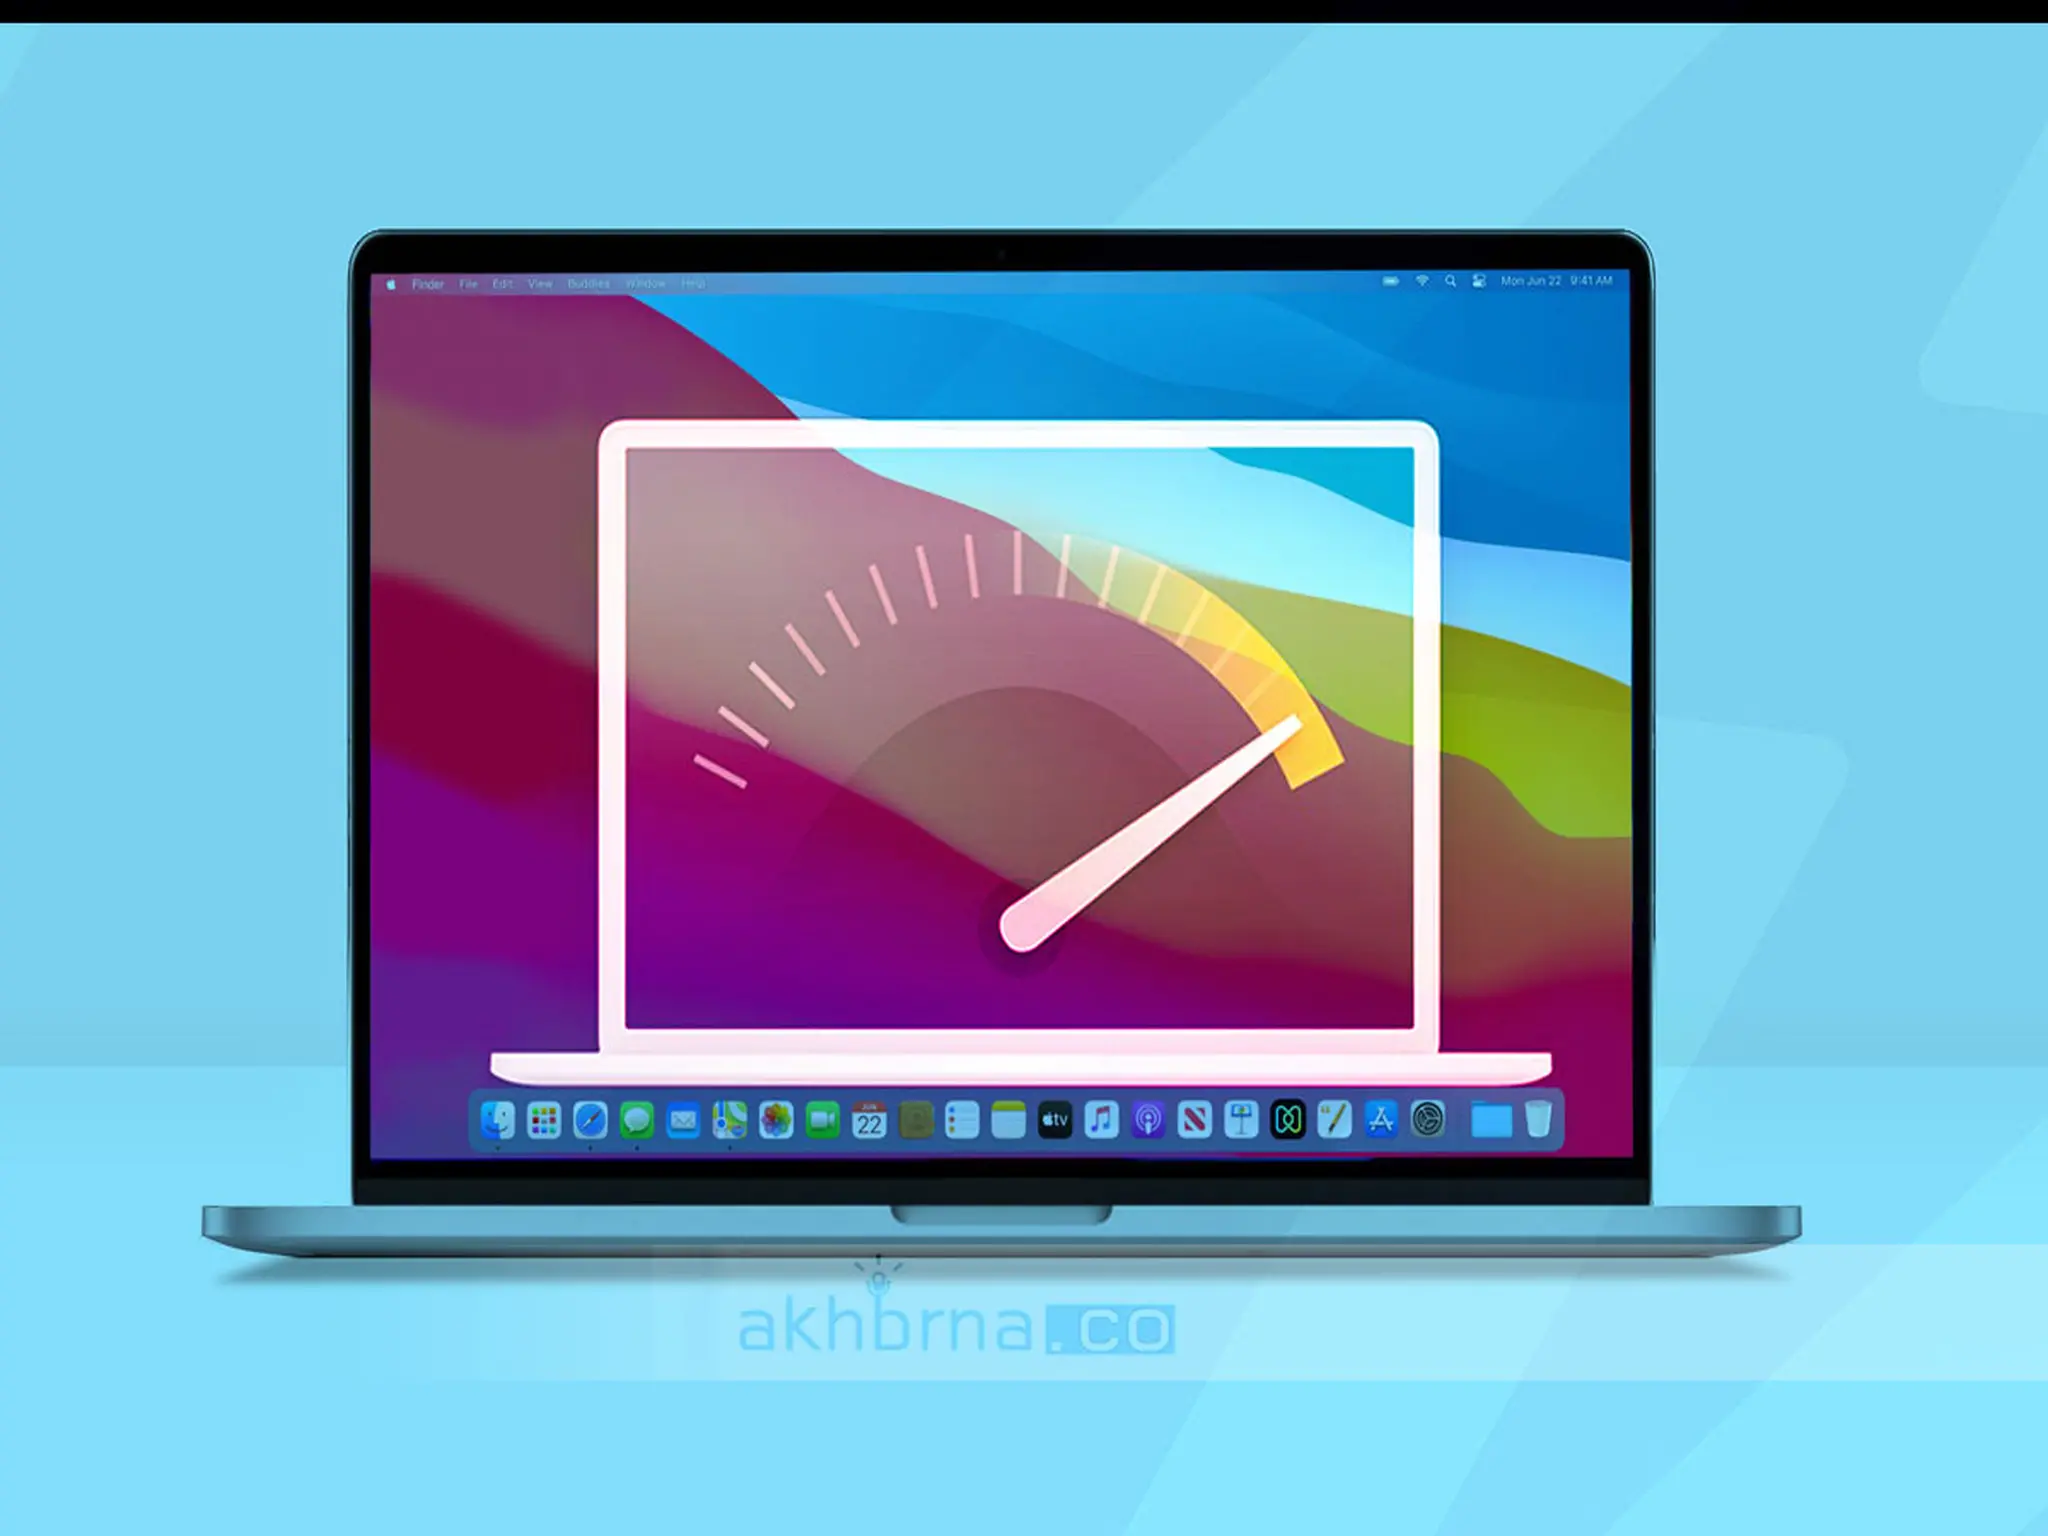 7 tips to speed up the performance of your new Mac